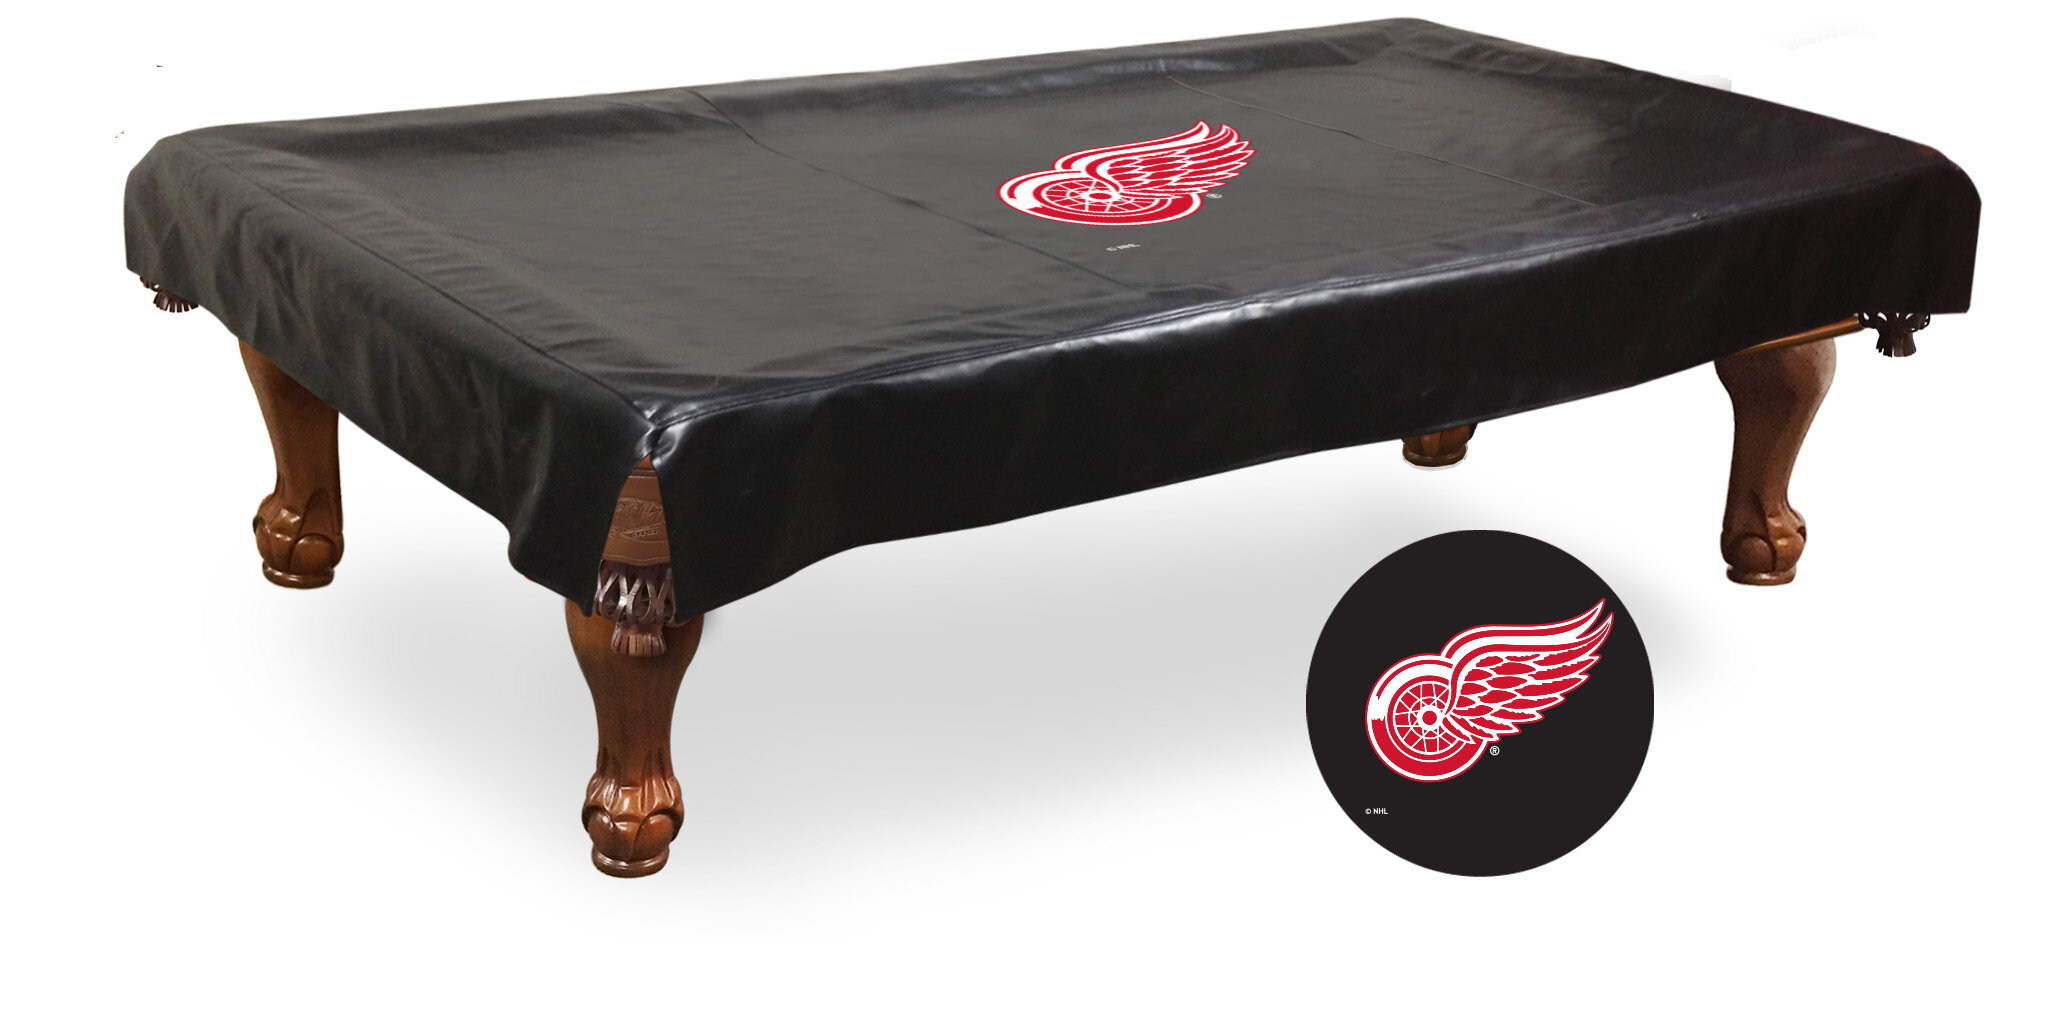 Holland Bar Stool Co 7 Detroit Red Wings Billiard Table Cover 